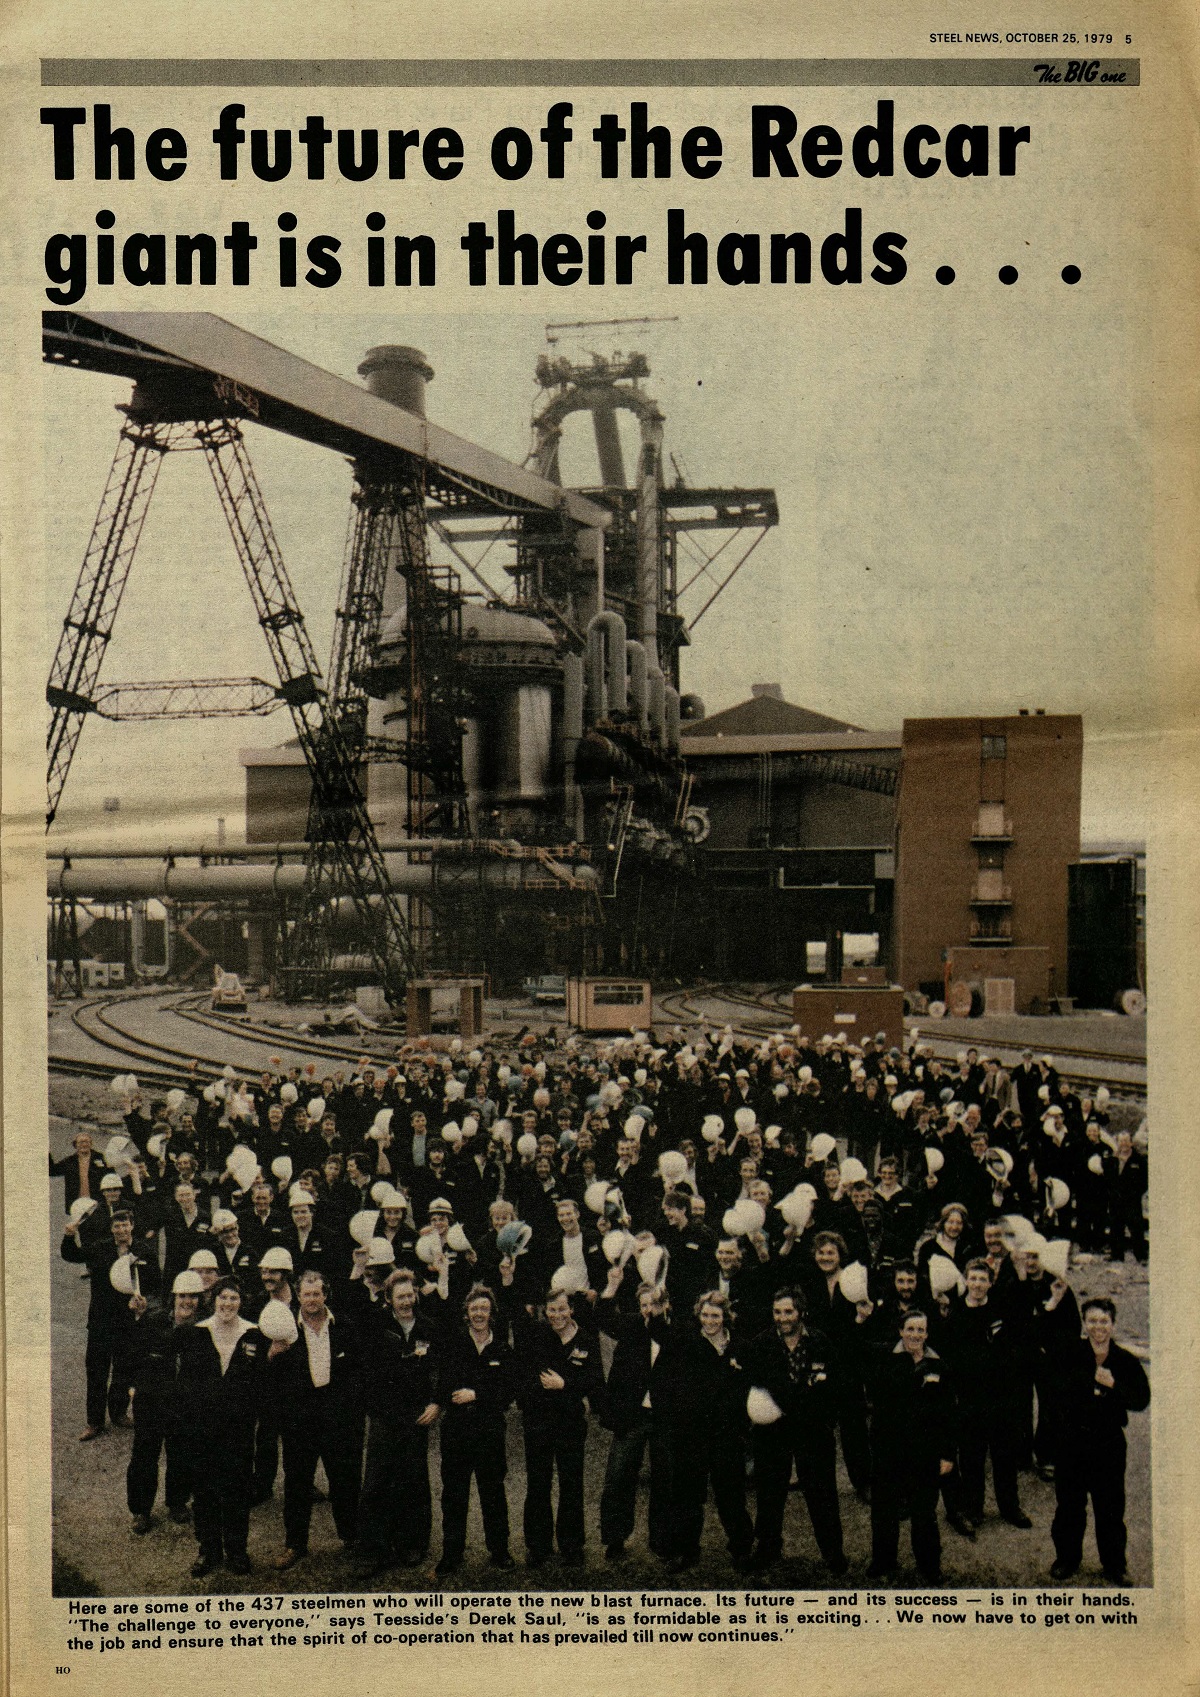 Staff at the Redcar Blast Furnace in 1979 